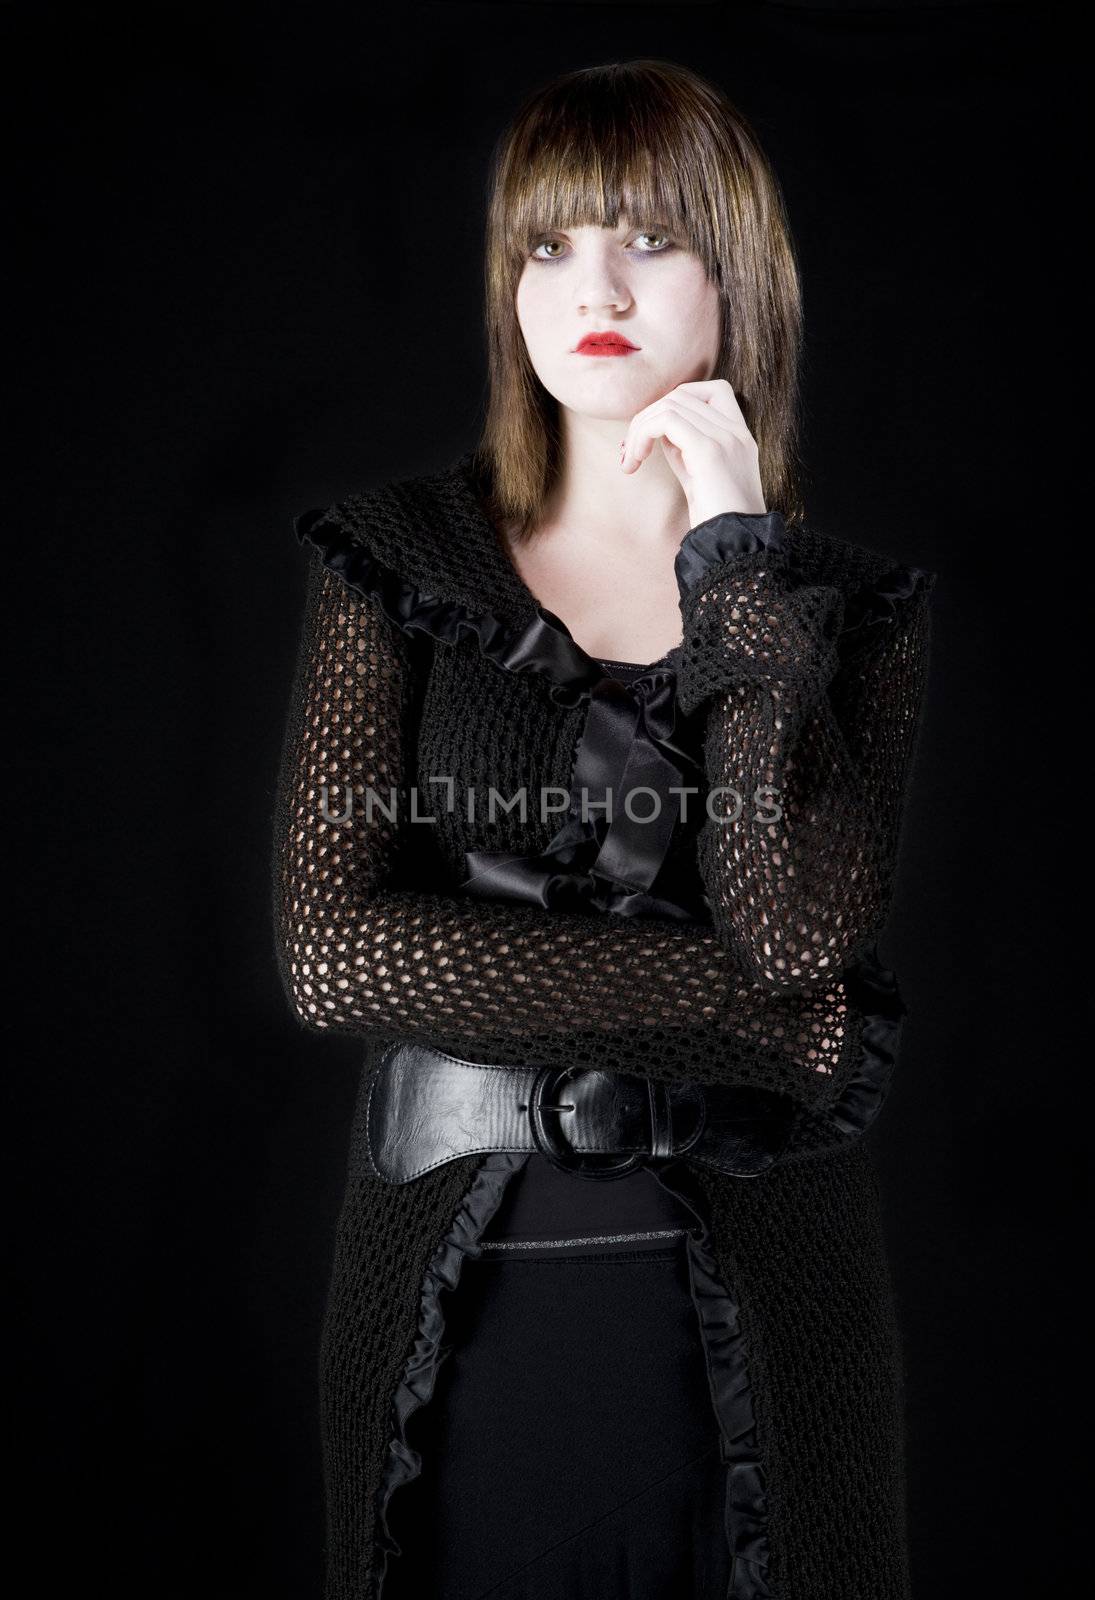 Mysterious young girl with dark makeup dressed in black